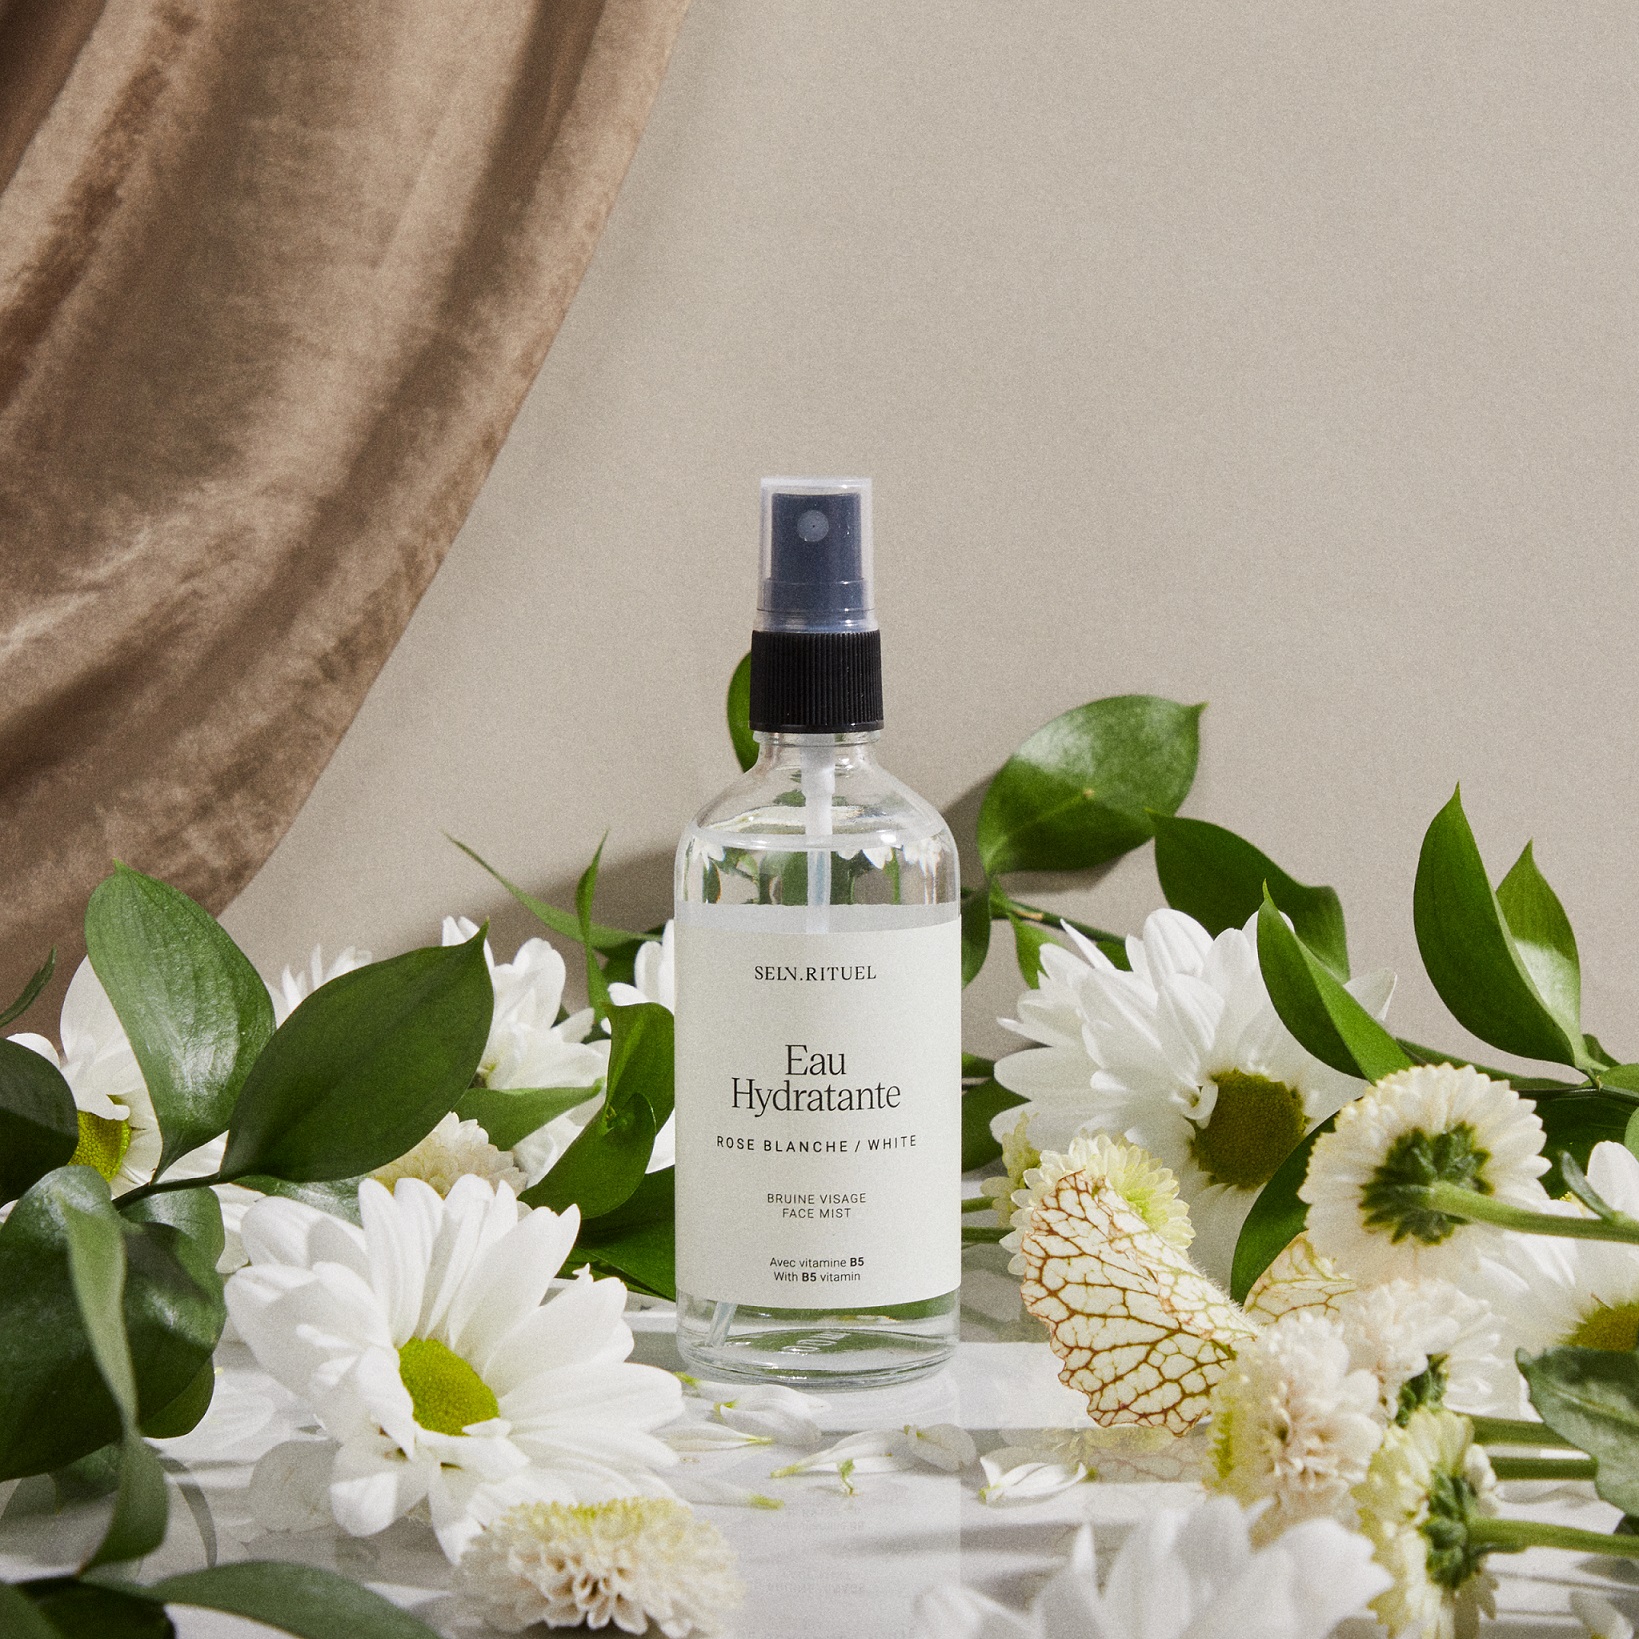 a bottle of botanical facial mist nest;led among greenery and flowers.